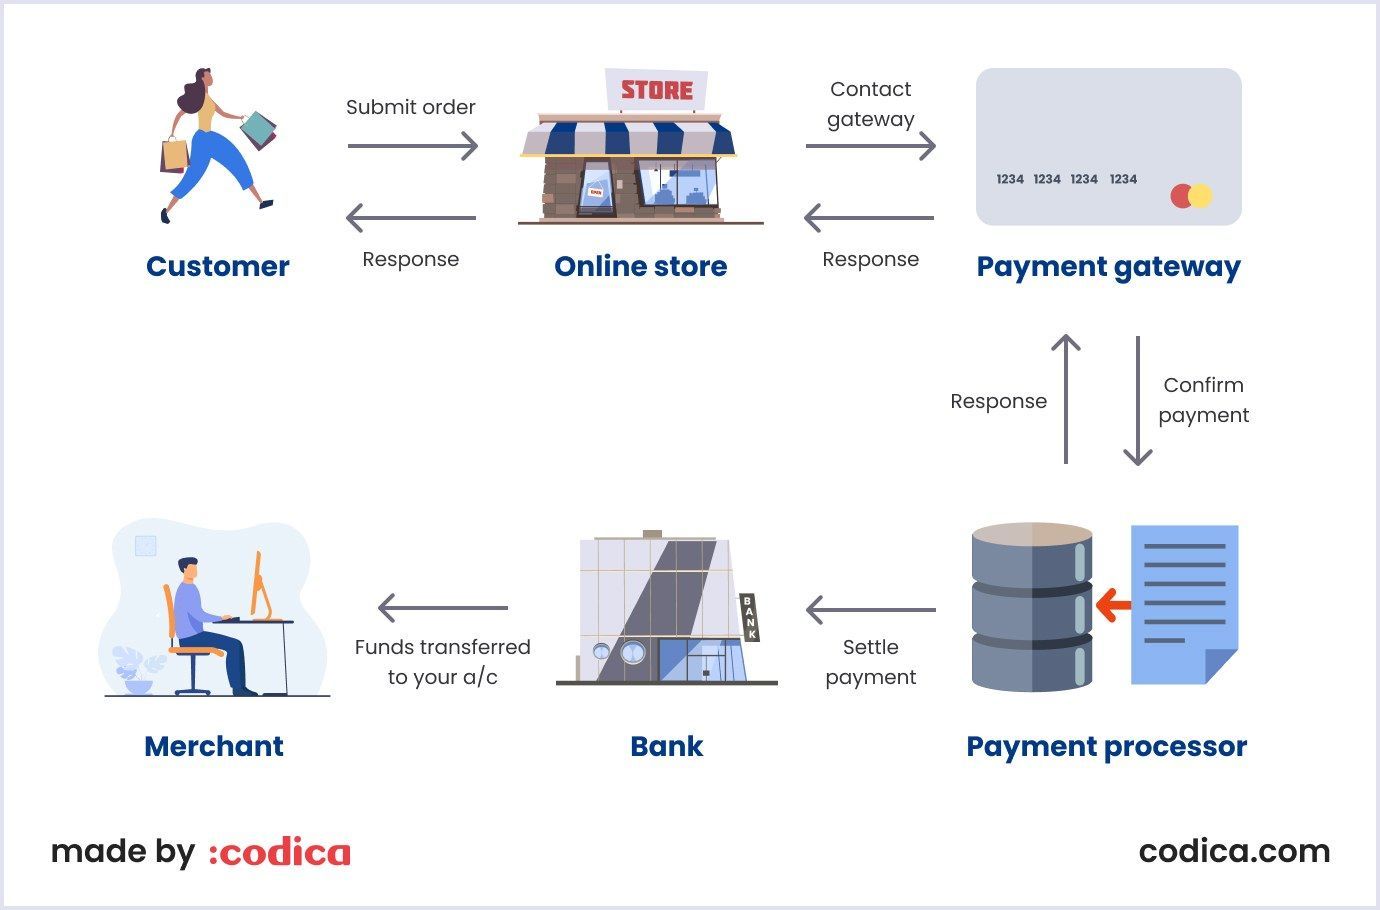 The work process of payment gateways